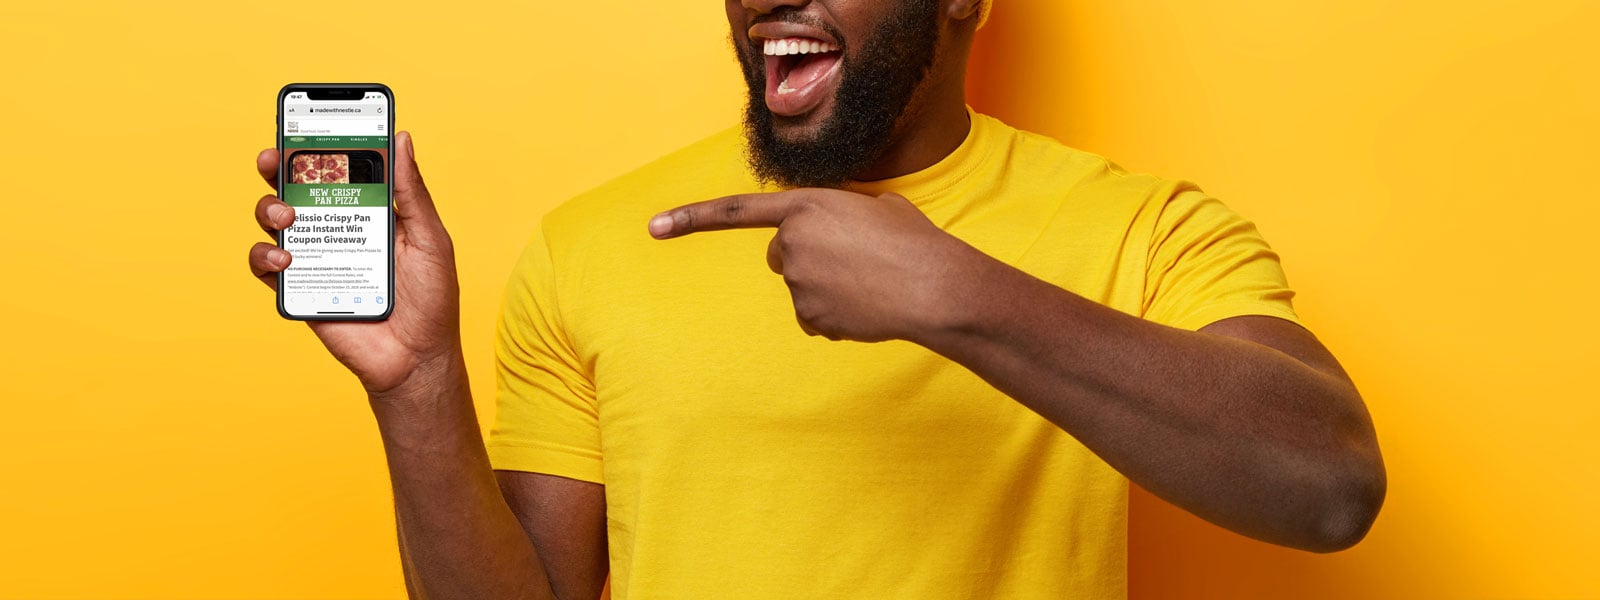 Excited man in yellow shirt points at his phone after participating in a trade promotion